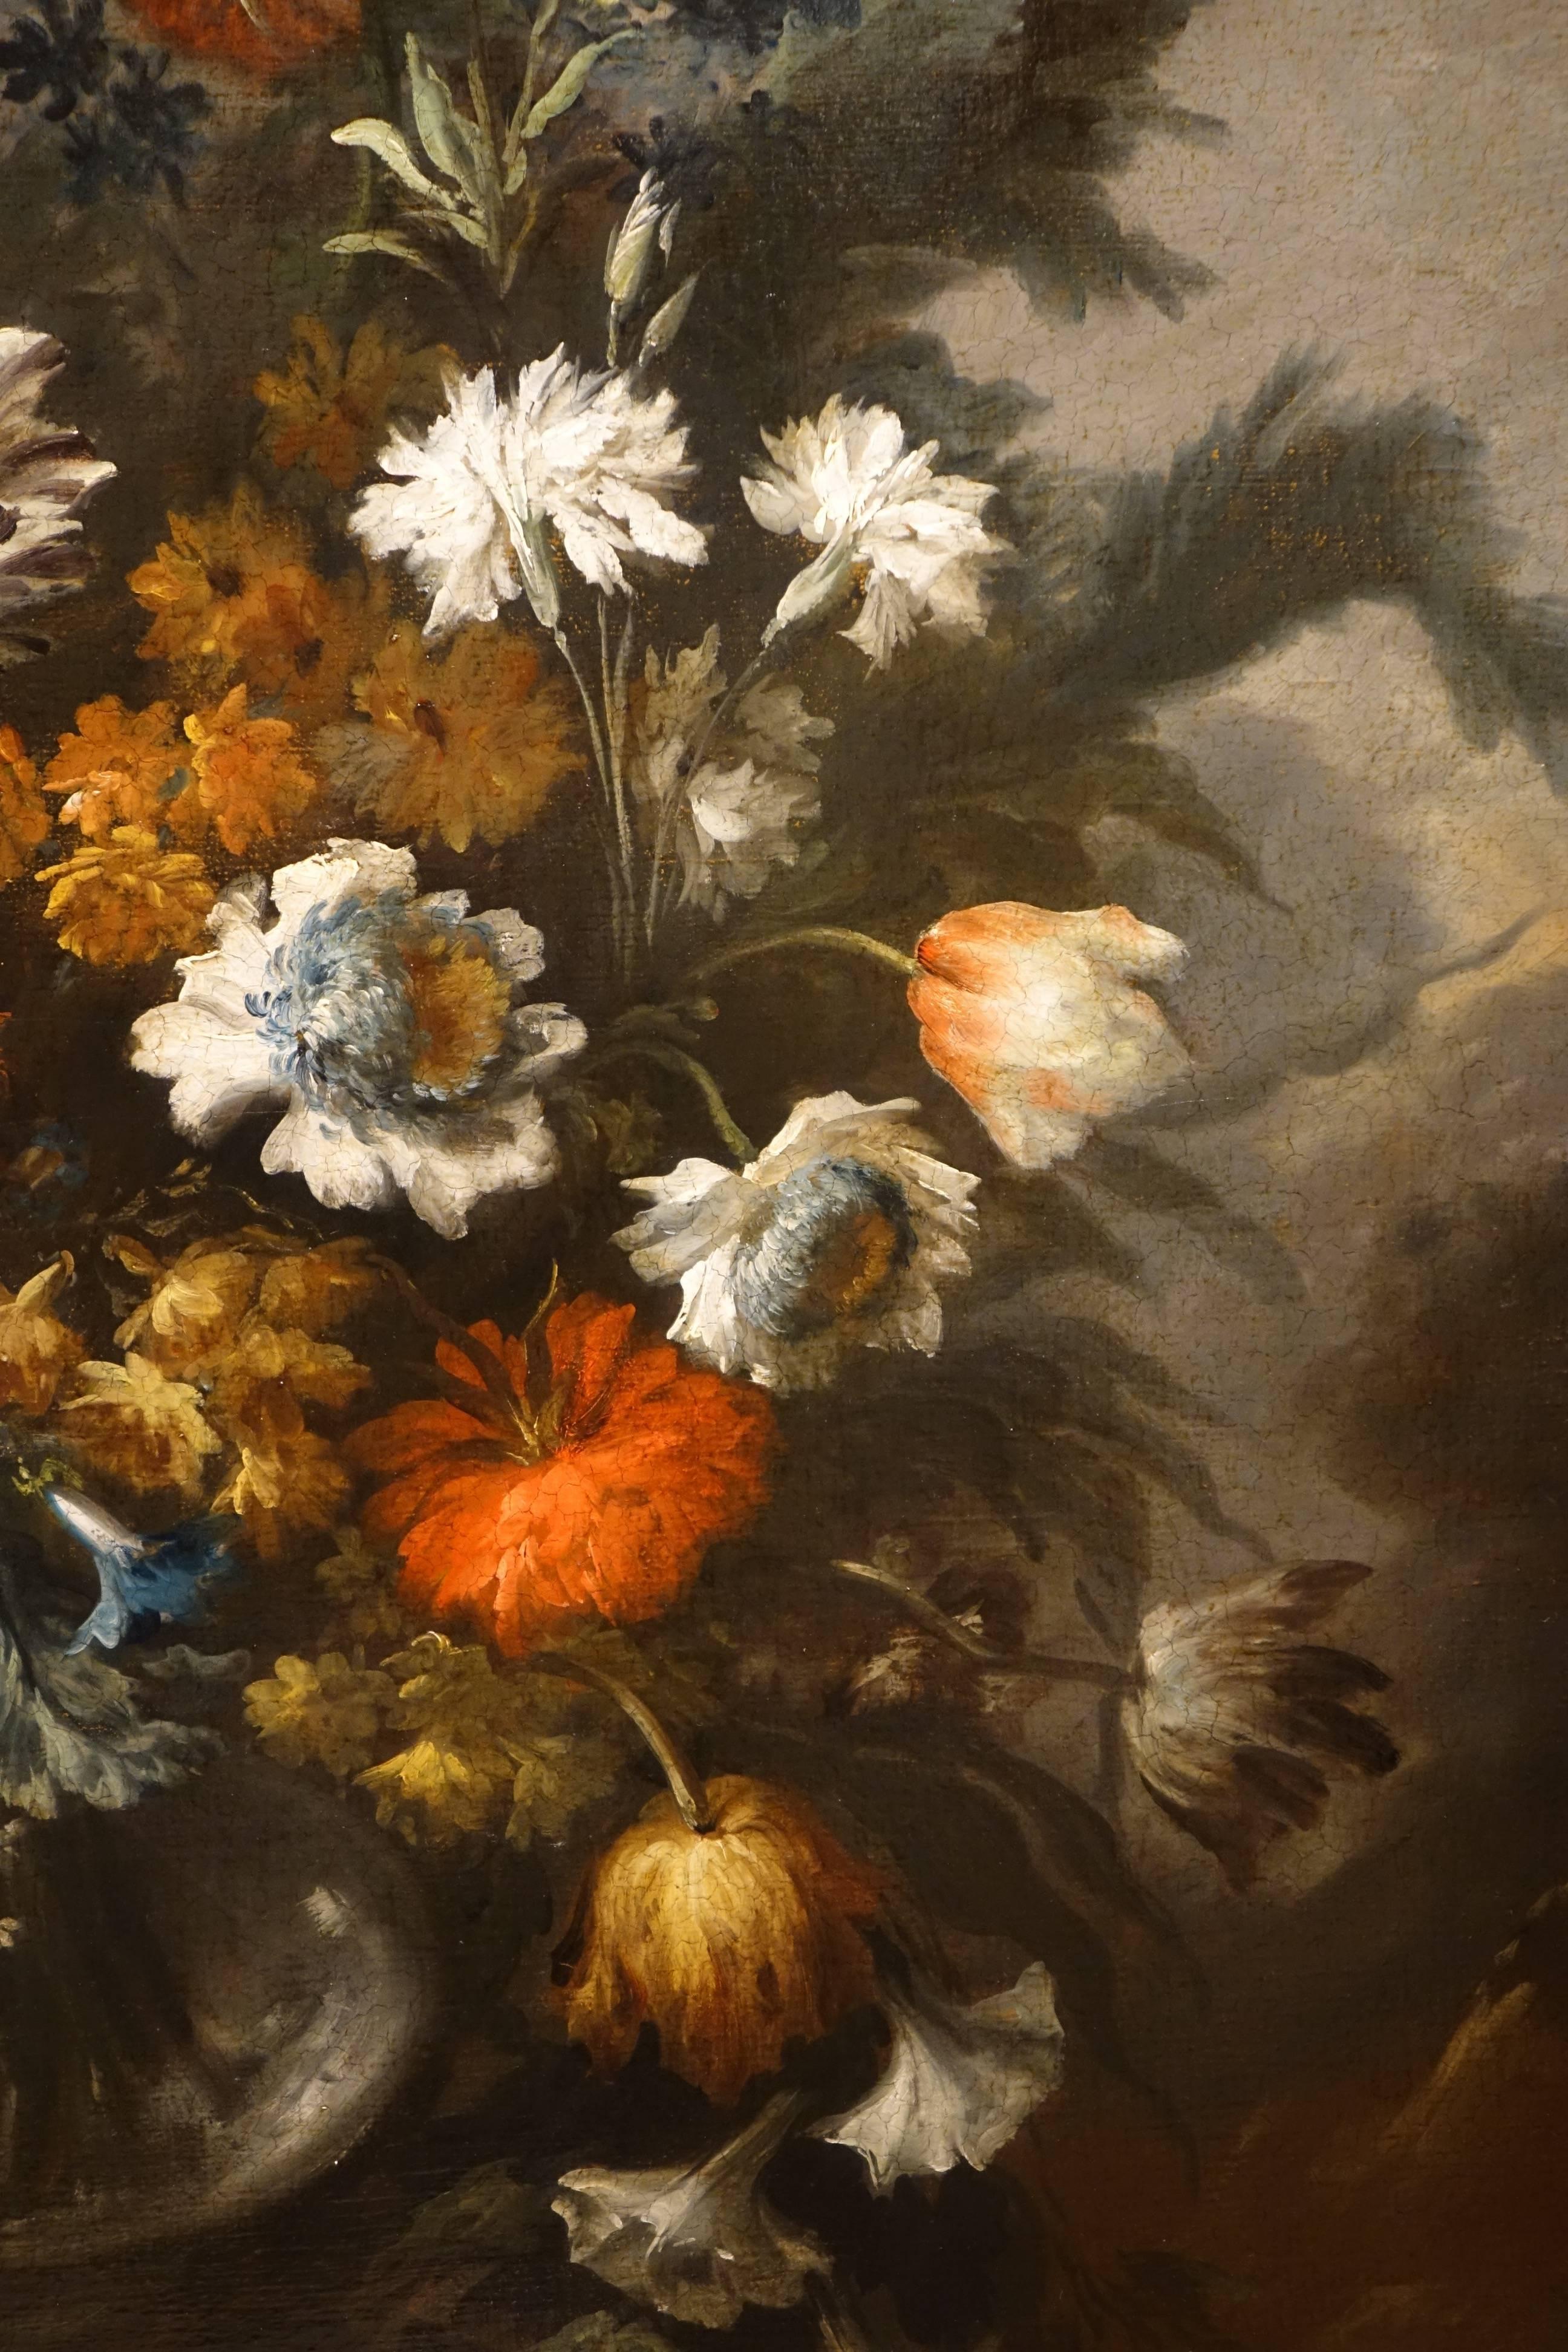 Large Bouquet of Flowers in the Spirit of the 17th Century Oil on Canvas, France 2